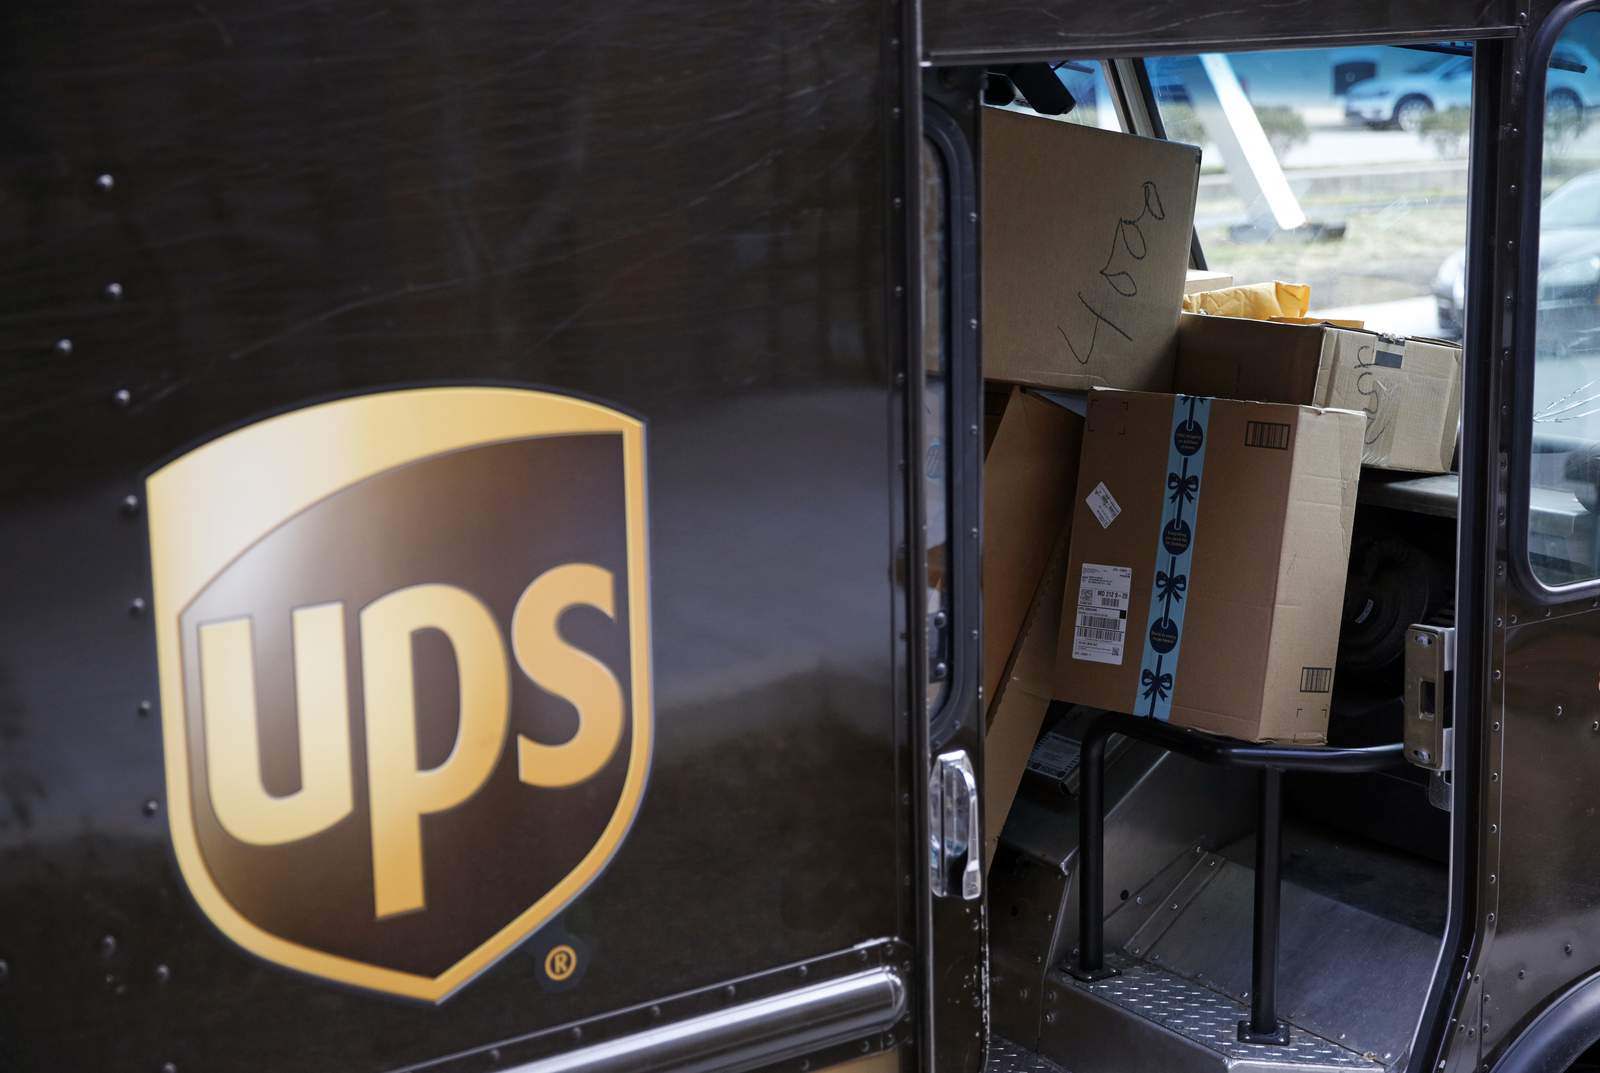 SHIPPING DEADLINES: Send your gifts by these dates to make sure they arrive for the holidays